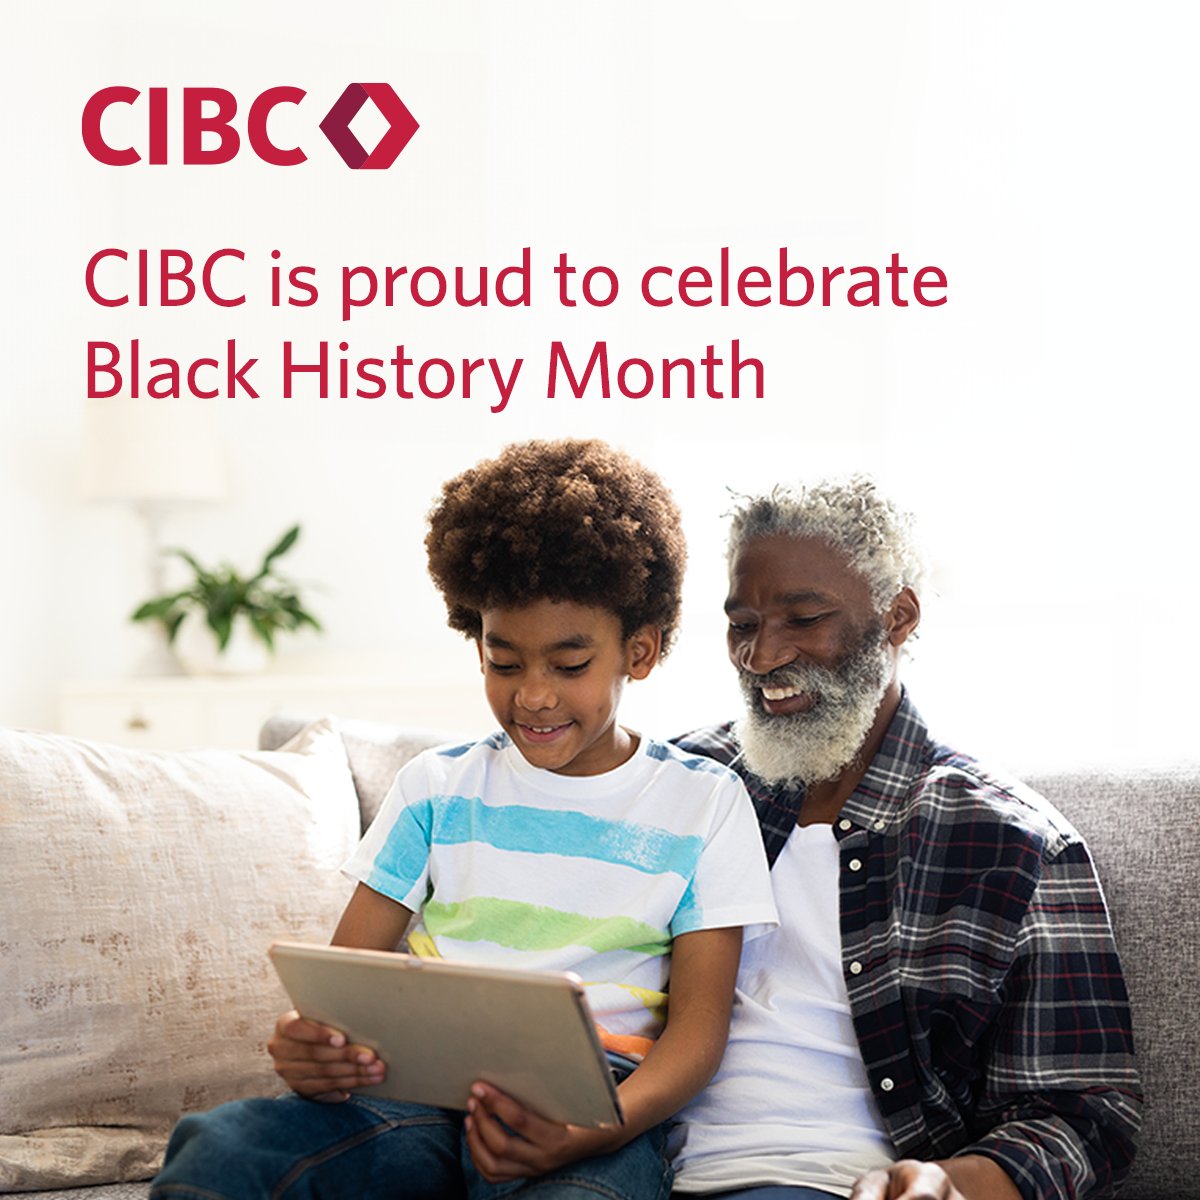 We’re proud to recognize Black History Month and support the ambitions of entrepreneurs and the next generation of changemakers all year-round. Learn more at bit.ly/4bnRuUC